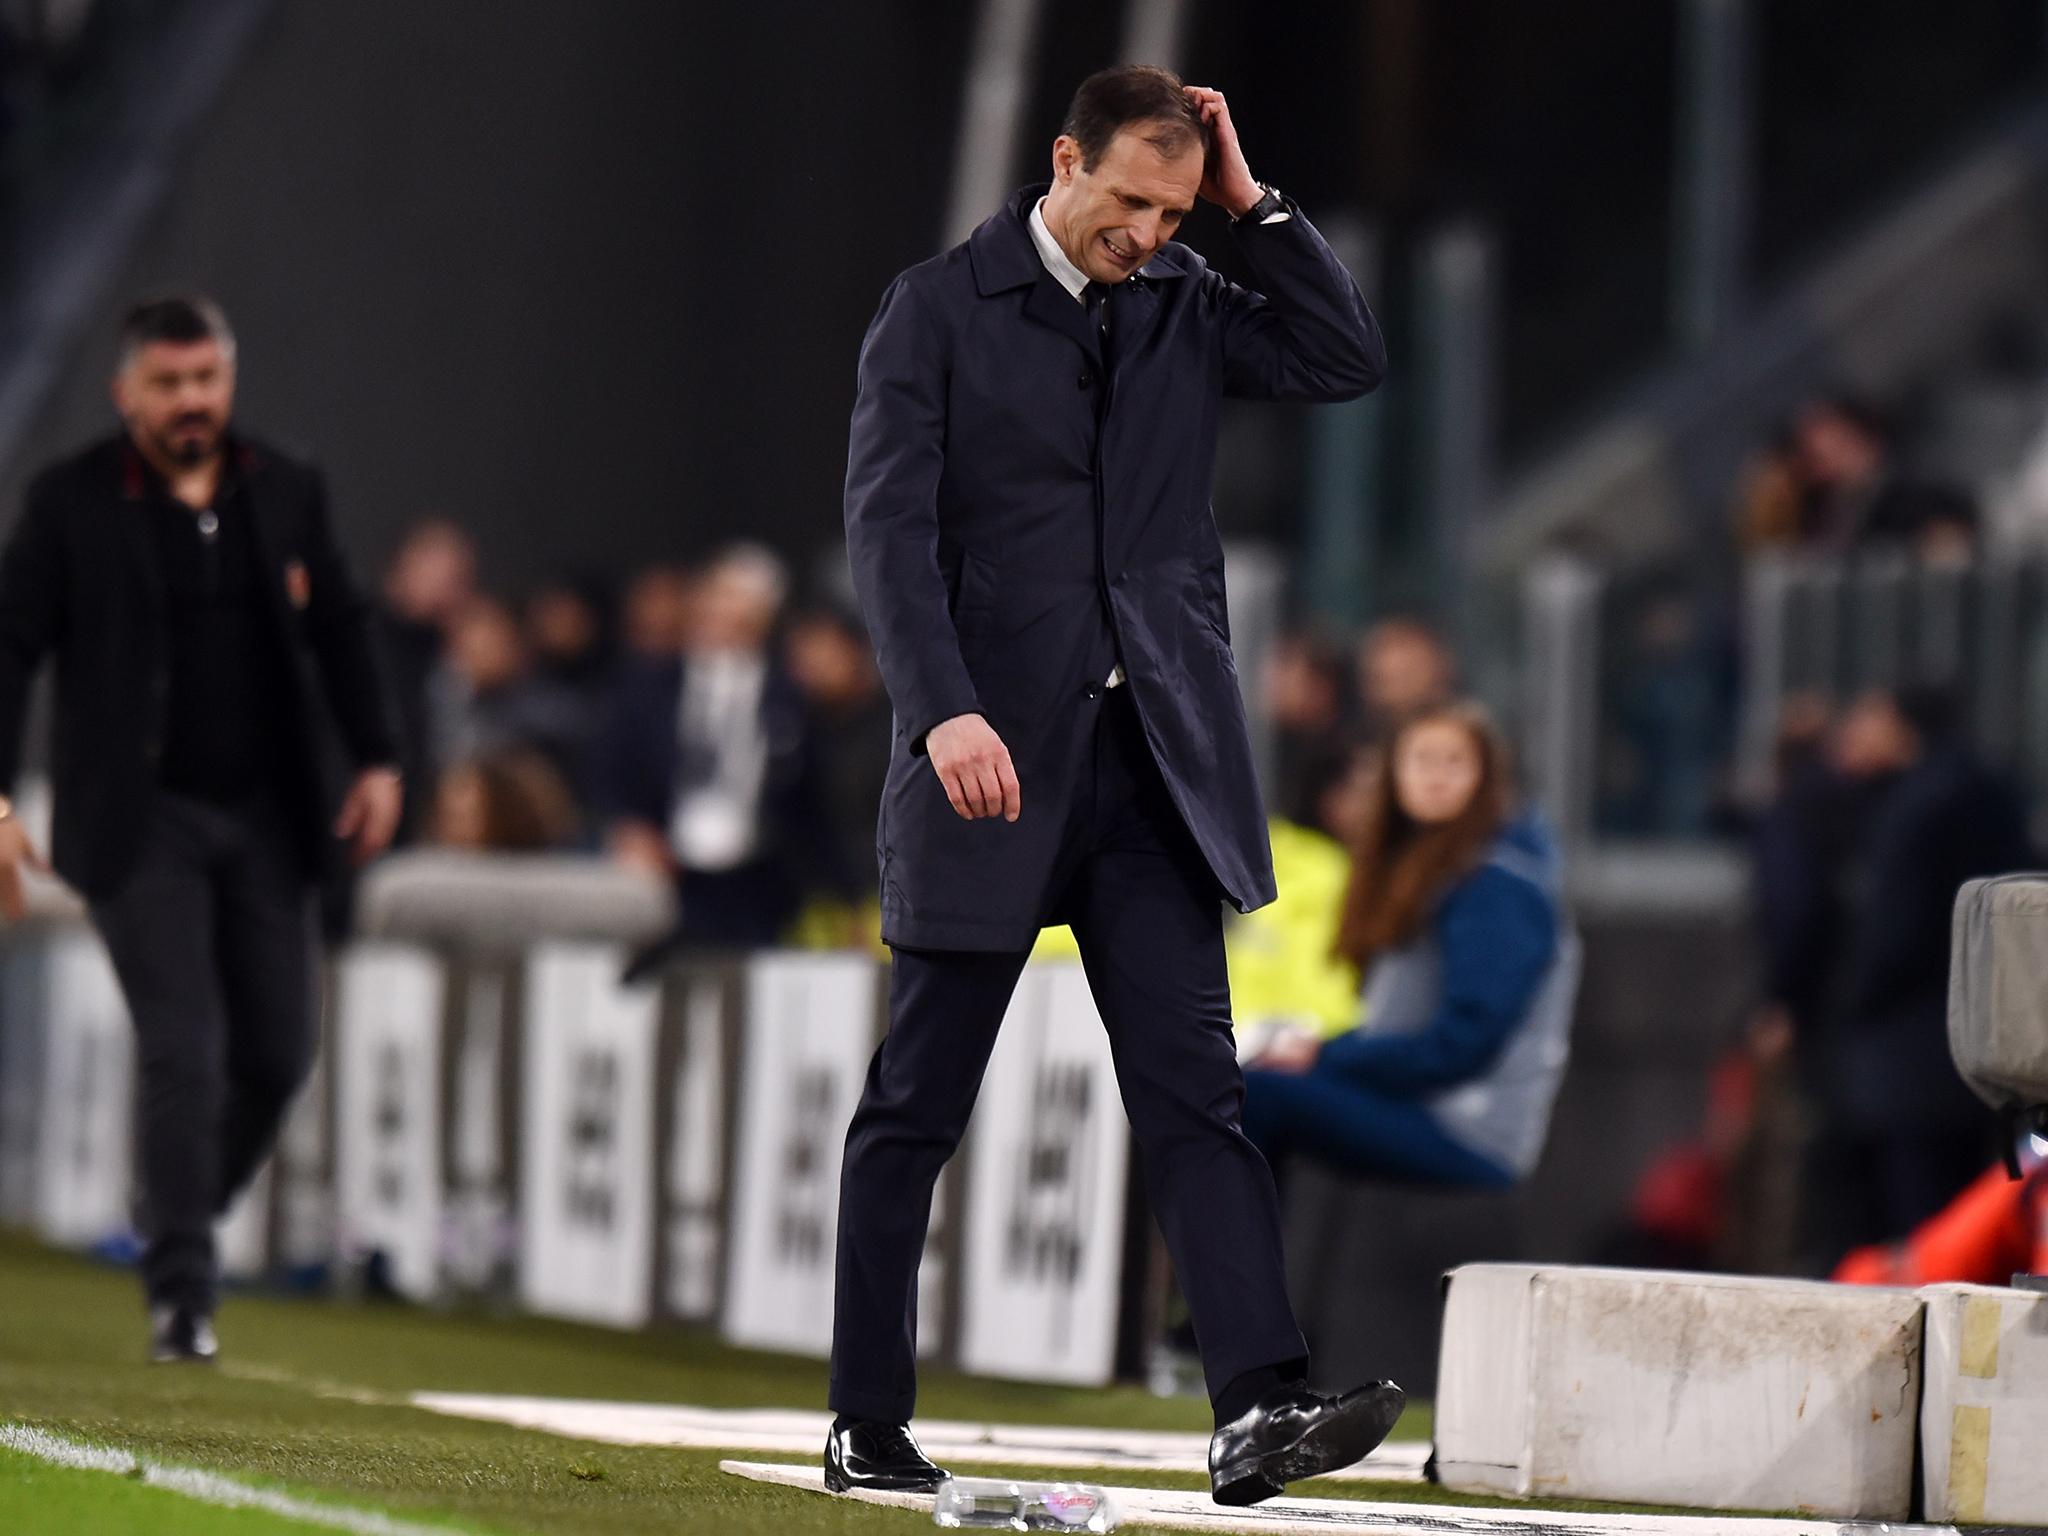 Massimo Allegri concedes defeat against Real Madrid after 'extraordinary' Cristiano Ronaldo goal